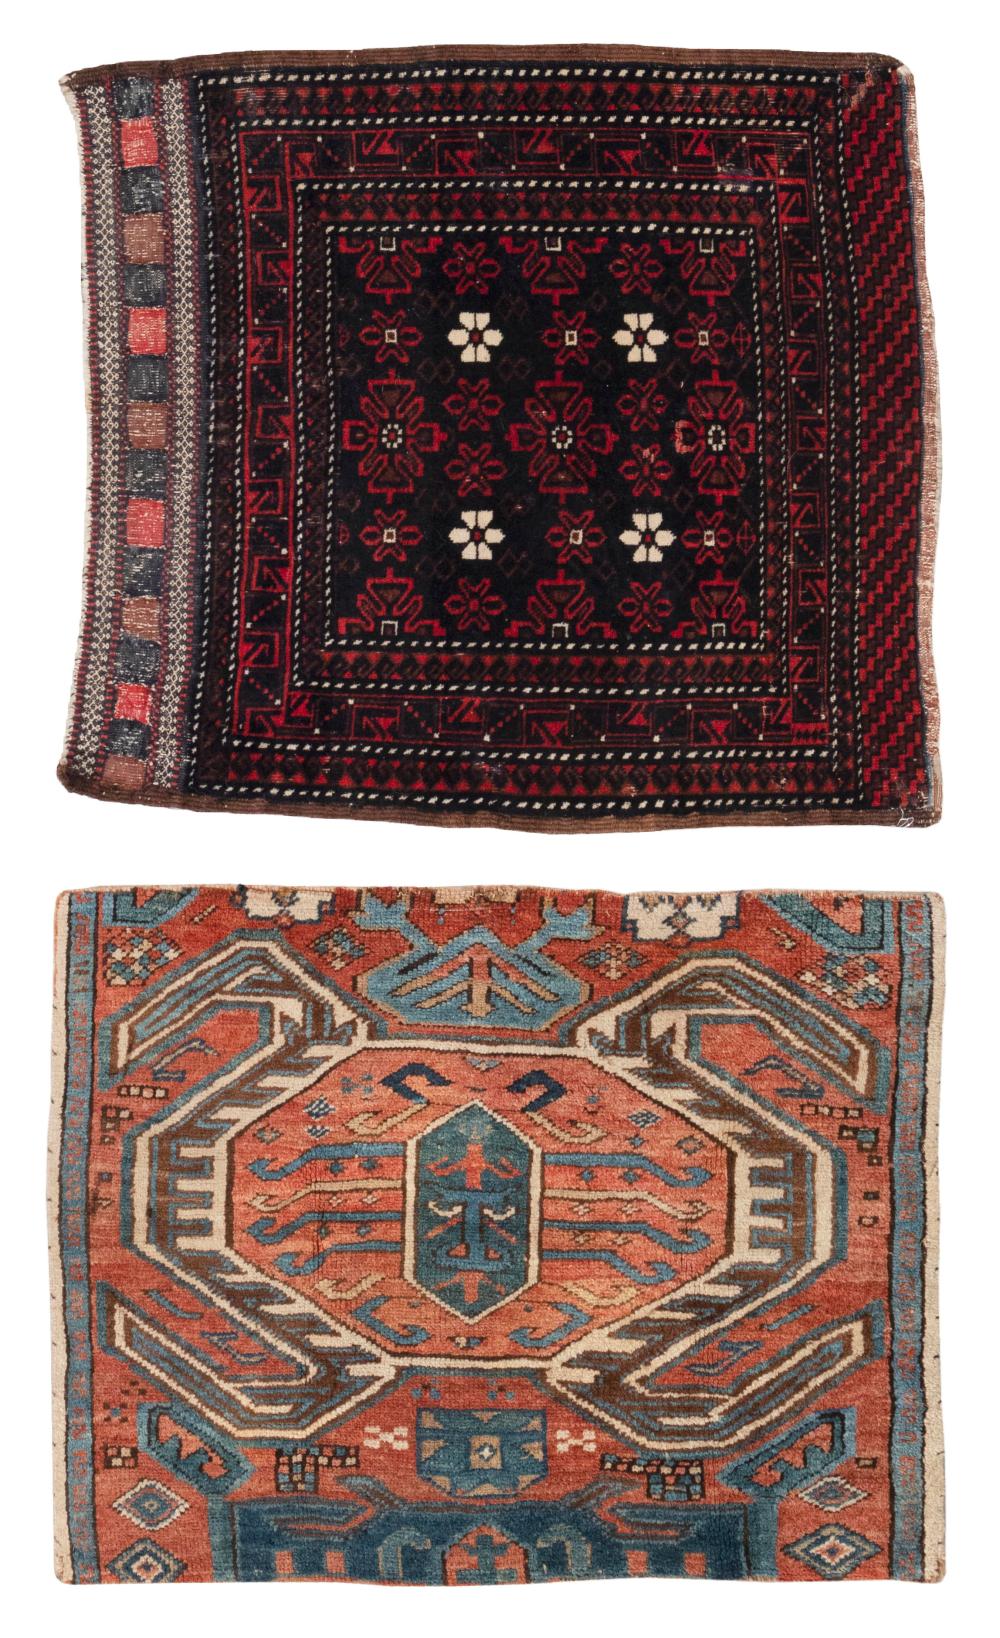 TWO ORIENTAL RUGS: BELOUCH AND